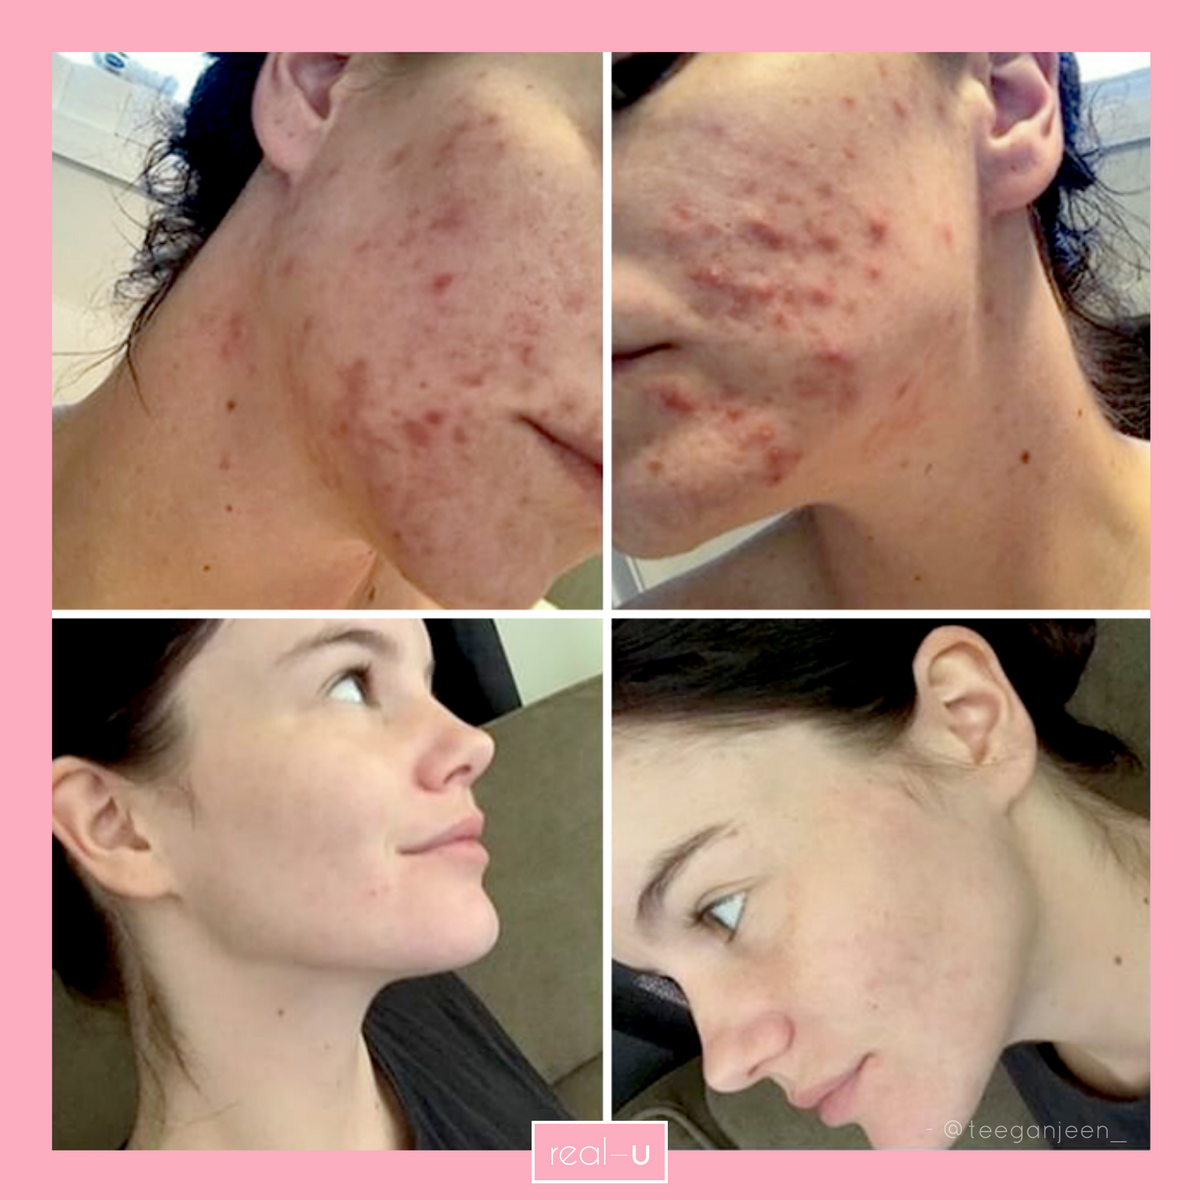 real-u acne skincare before and after result